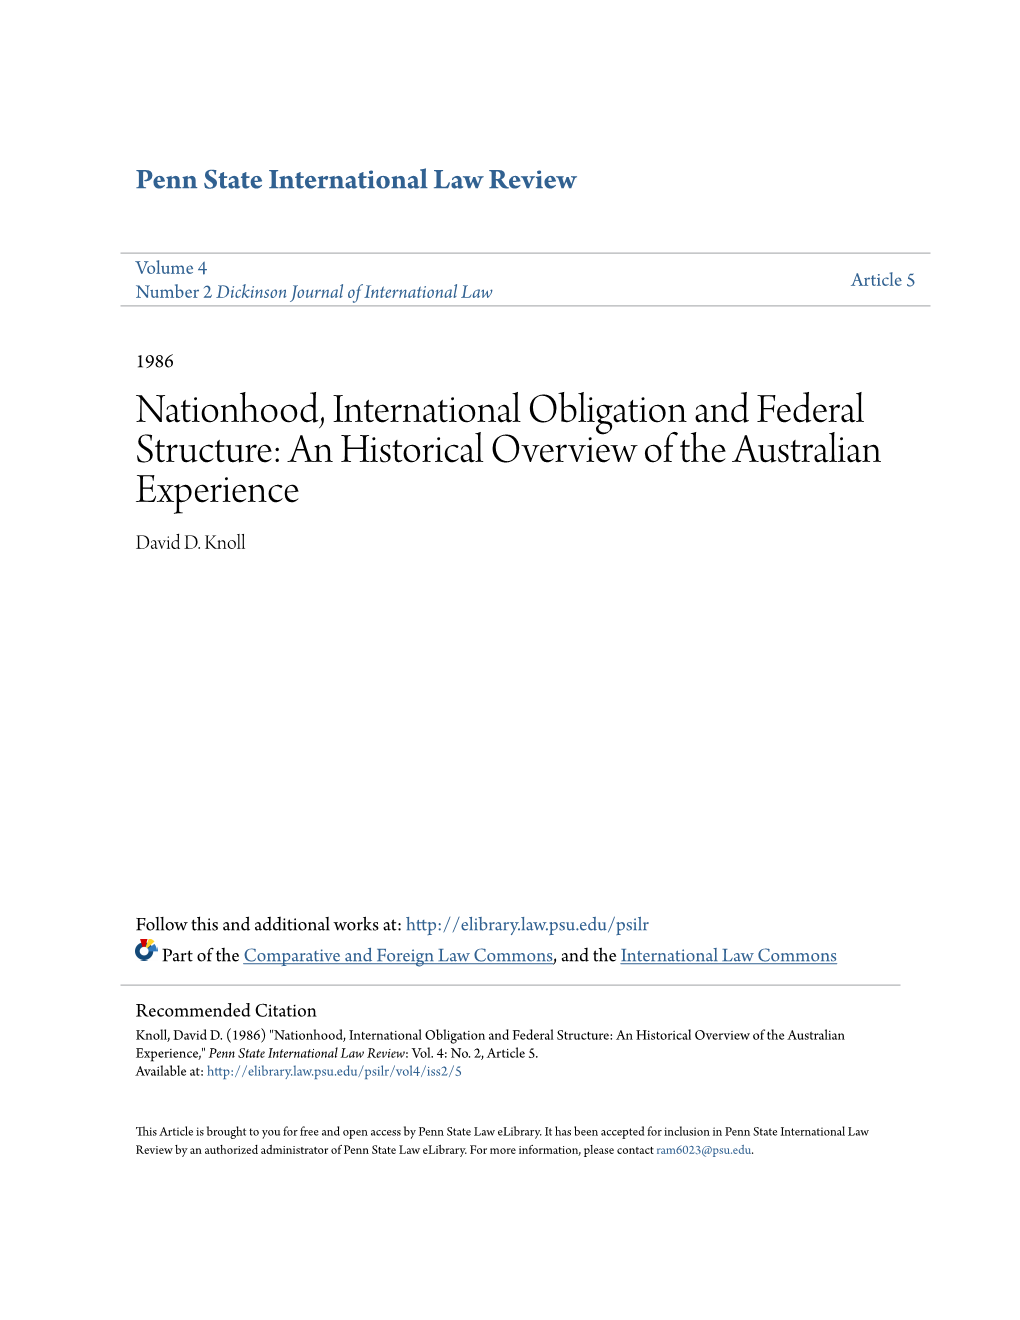 Nationhood, International Obligation and Federal Structure: an Historical Overview of the Australian Experience David D